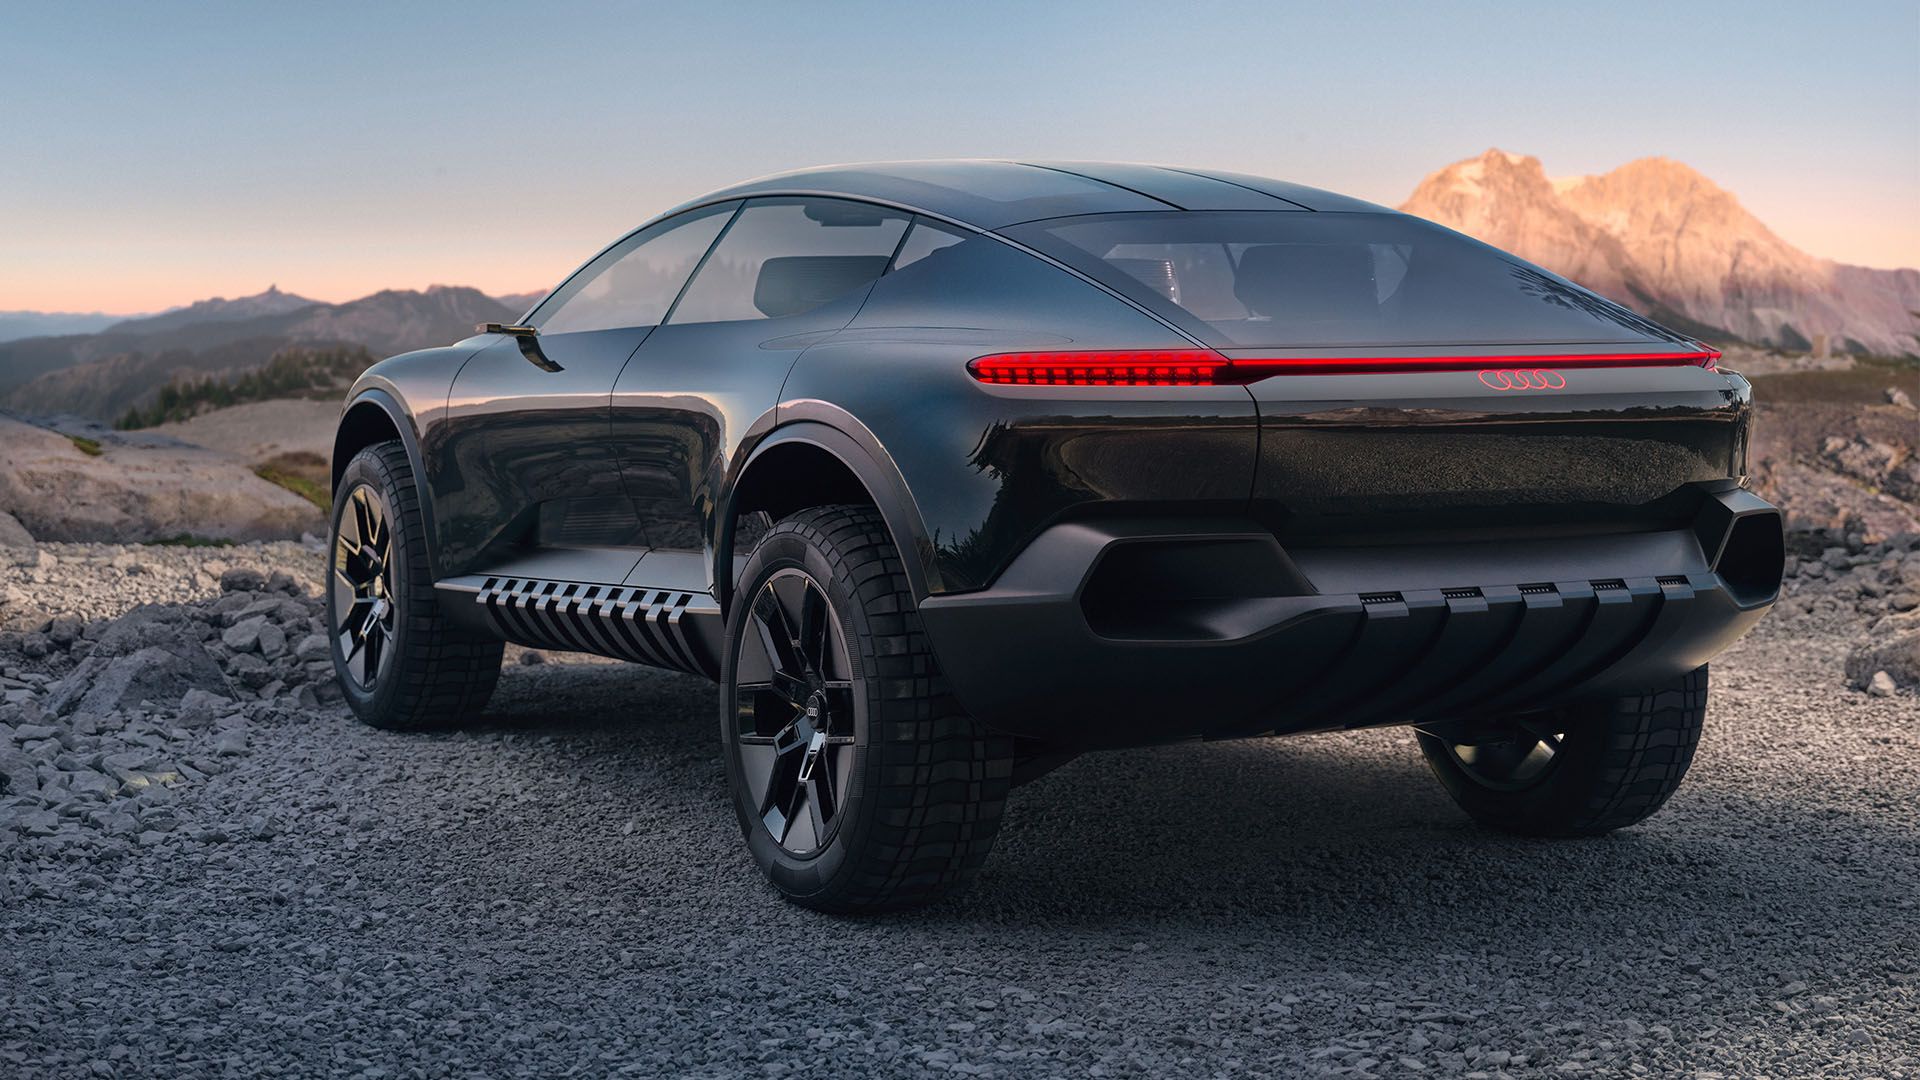 Rear view of the Audi activesphere concept.